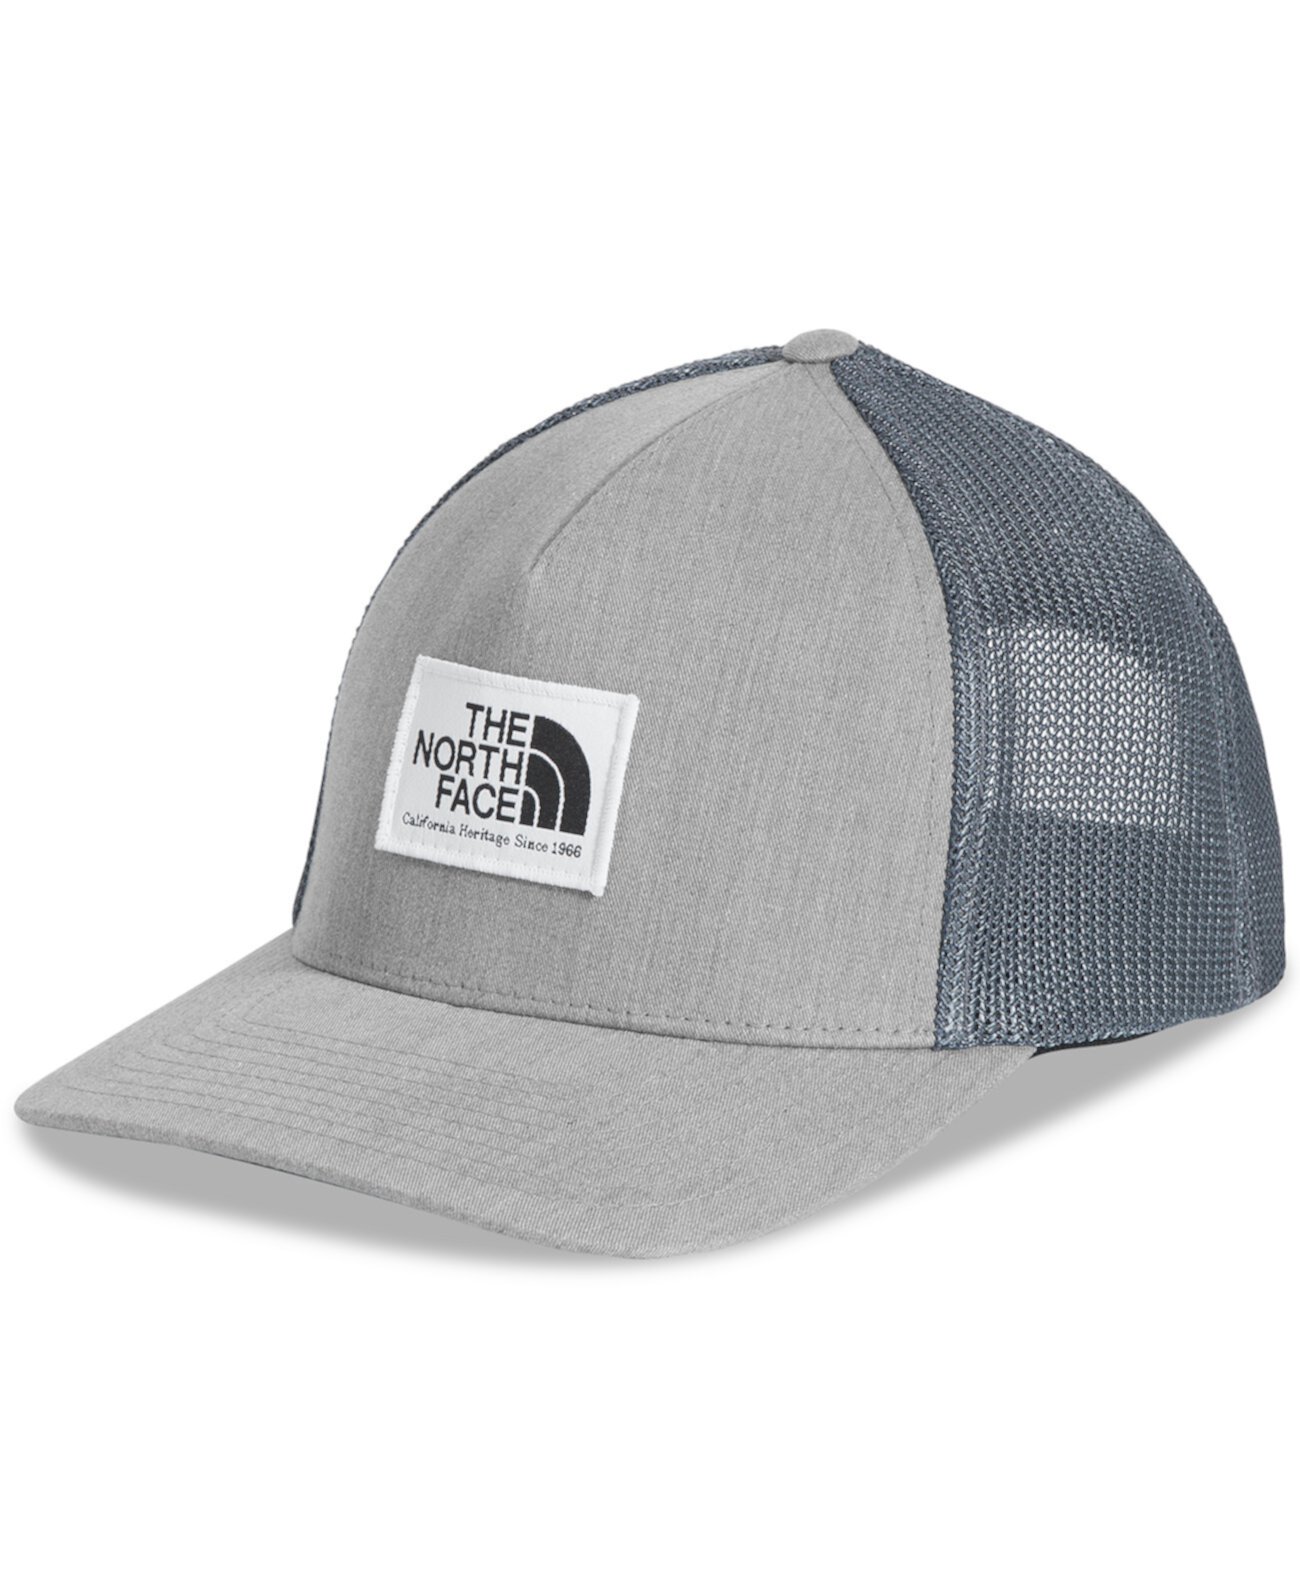 Men's Keep It Patched Logo Trucker Hat The North Face